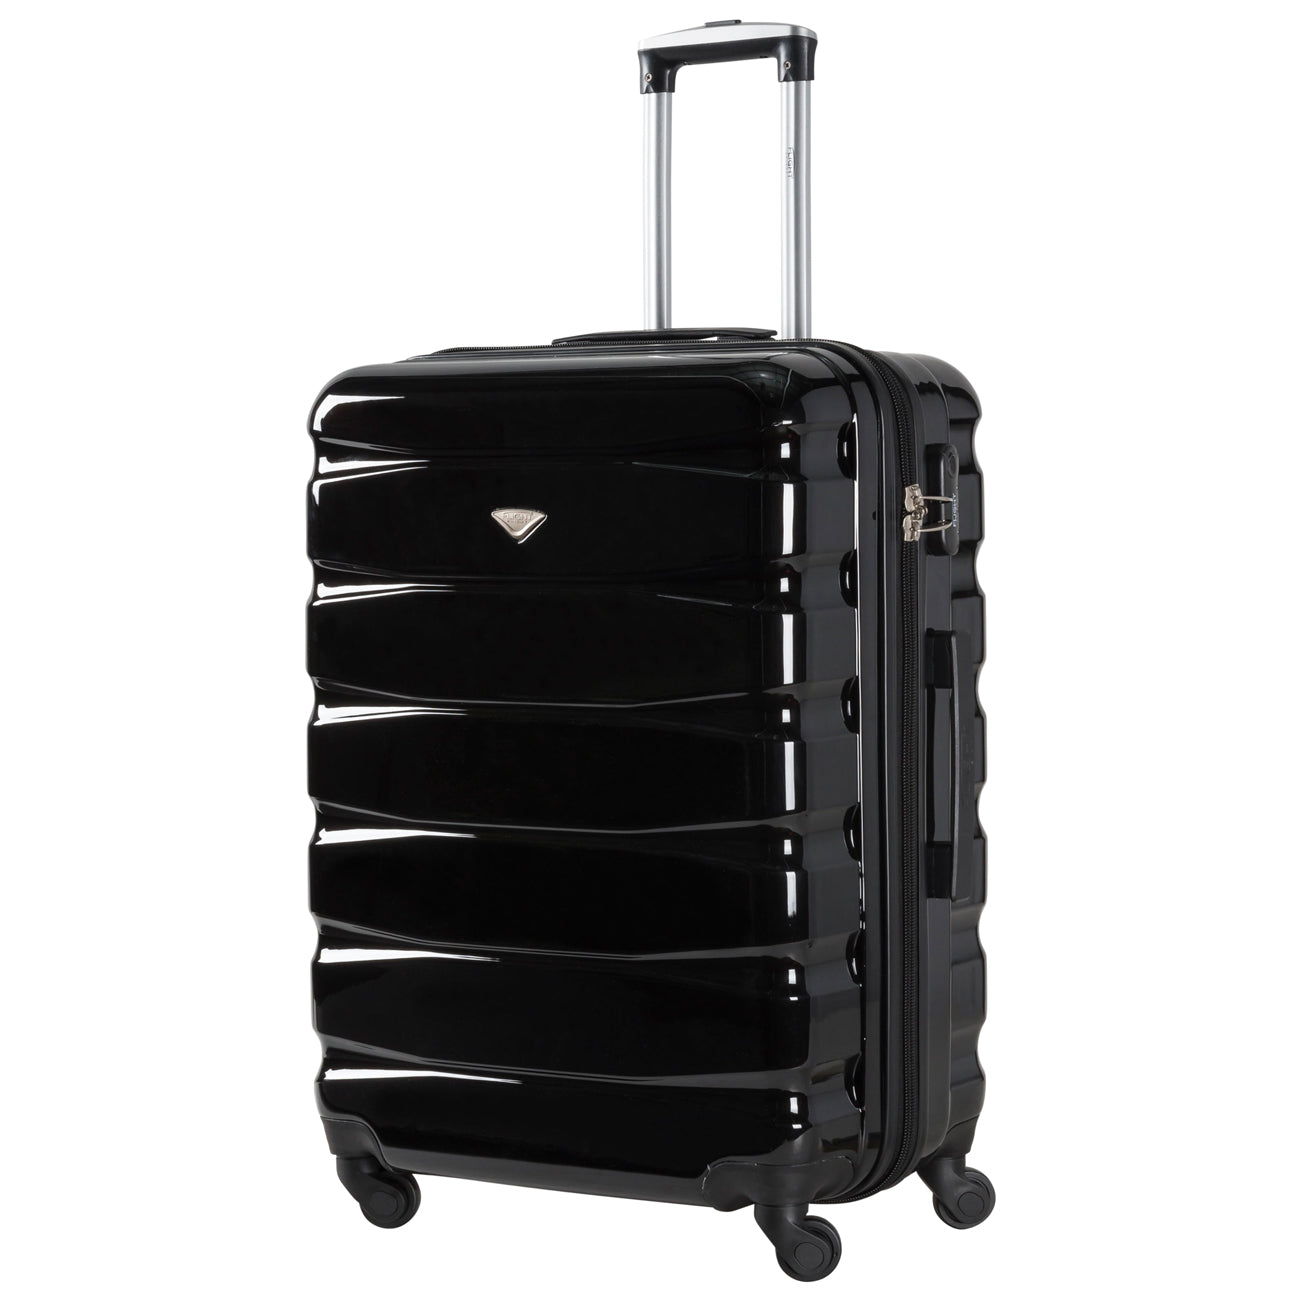 Lightweight 4 Wheel Hard Case Suitcases Cabin & Hold Luggage Emirates Approved